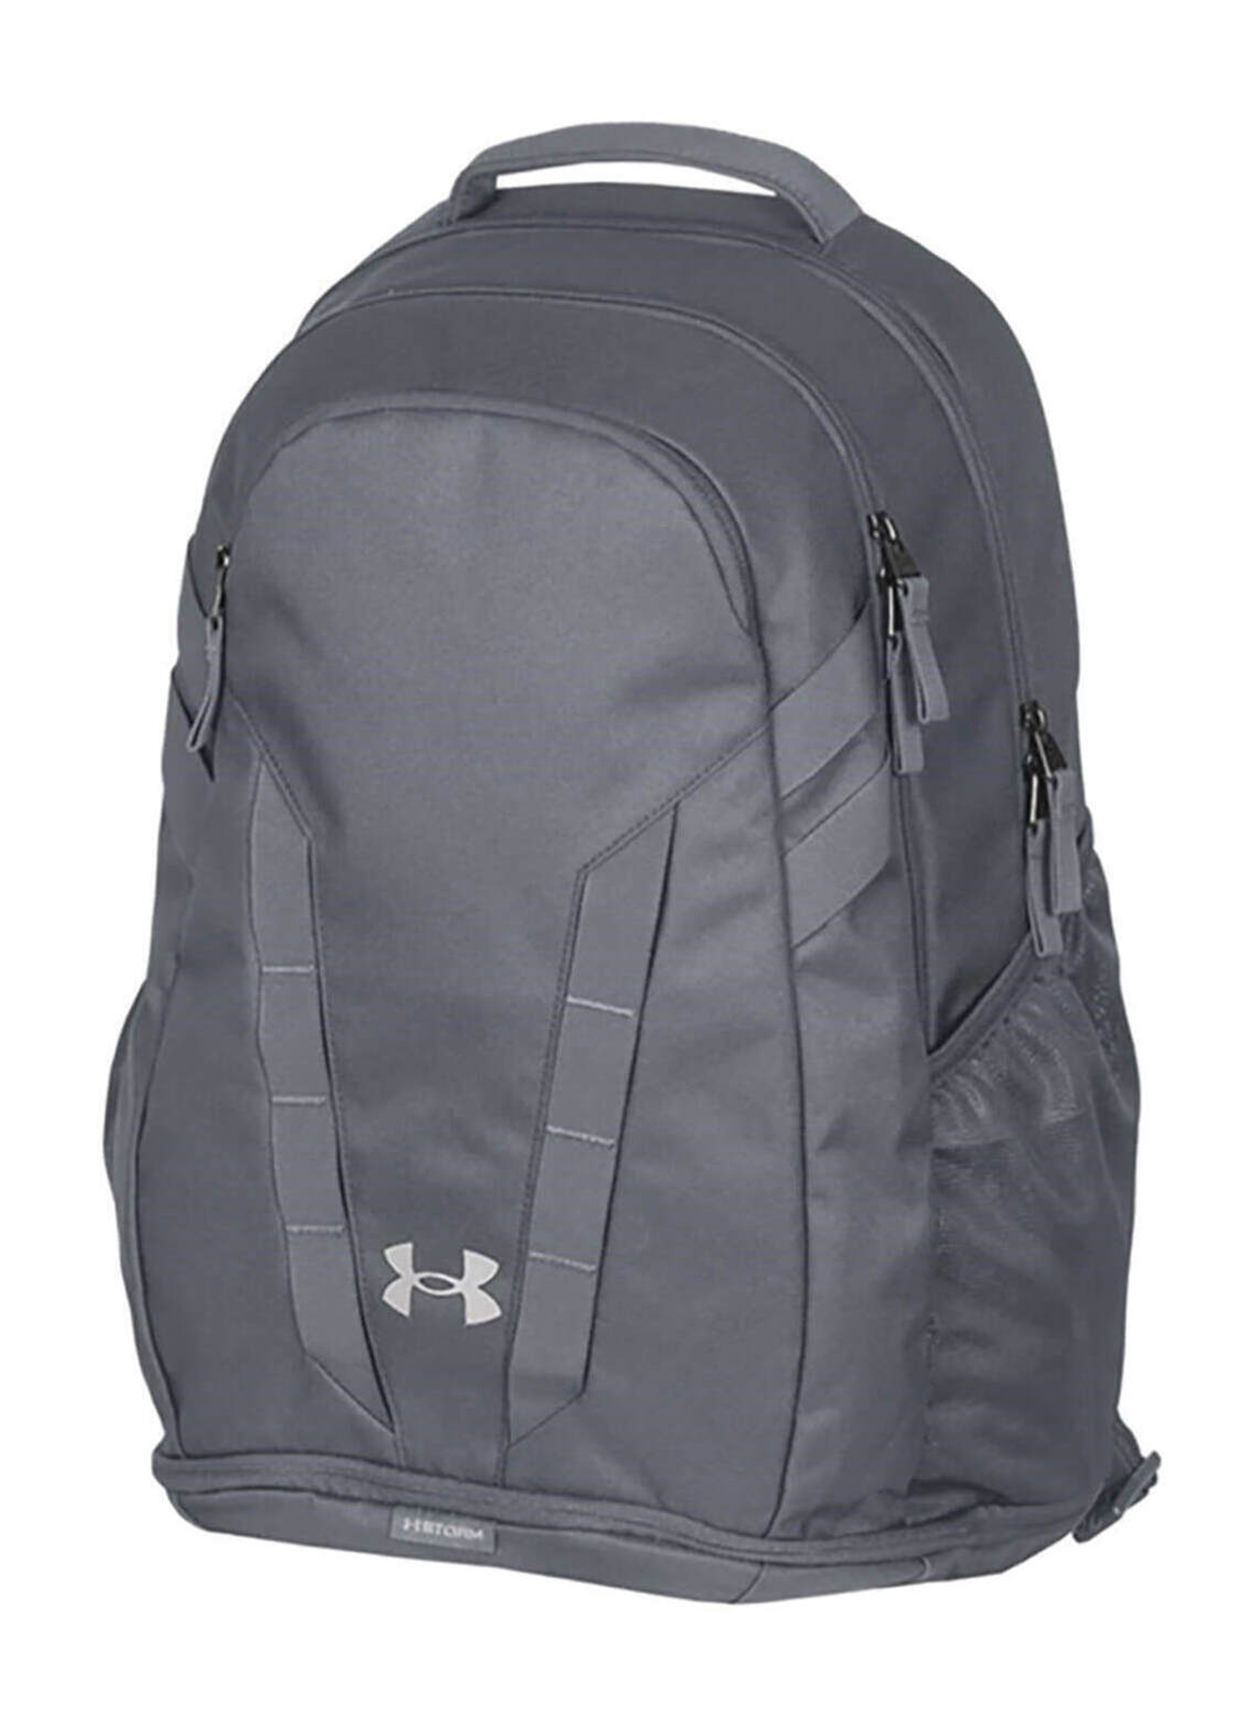 Under Armour Pitch Grey Hustle 5.0 Backpack